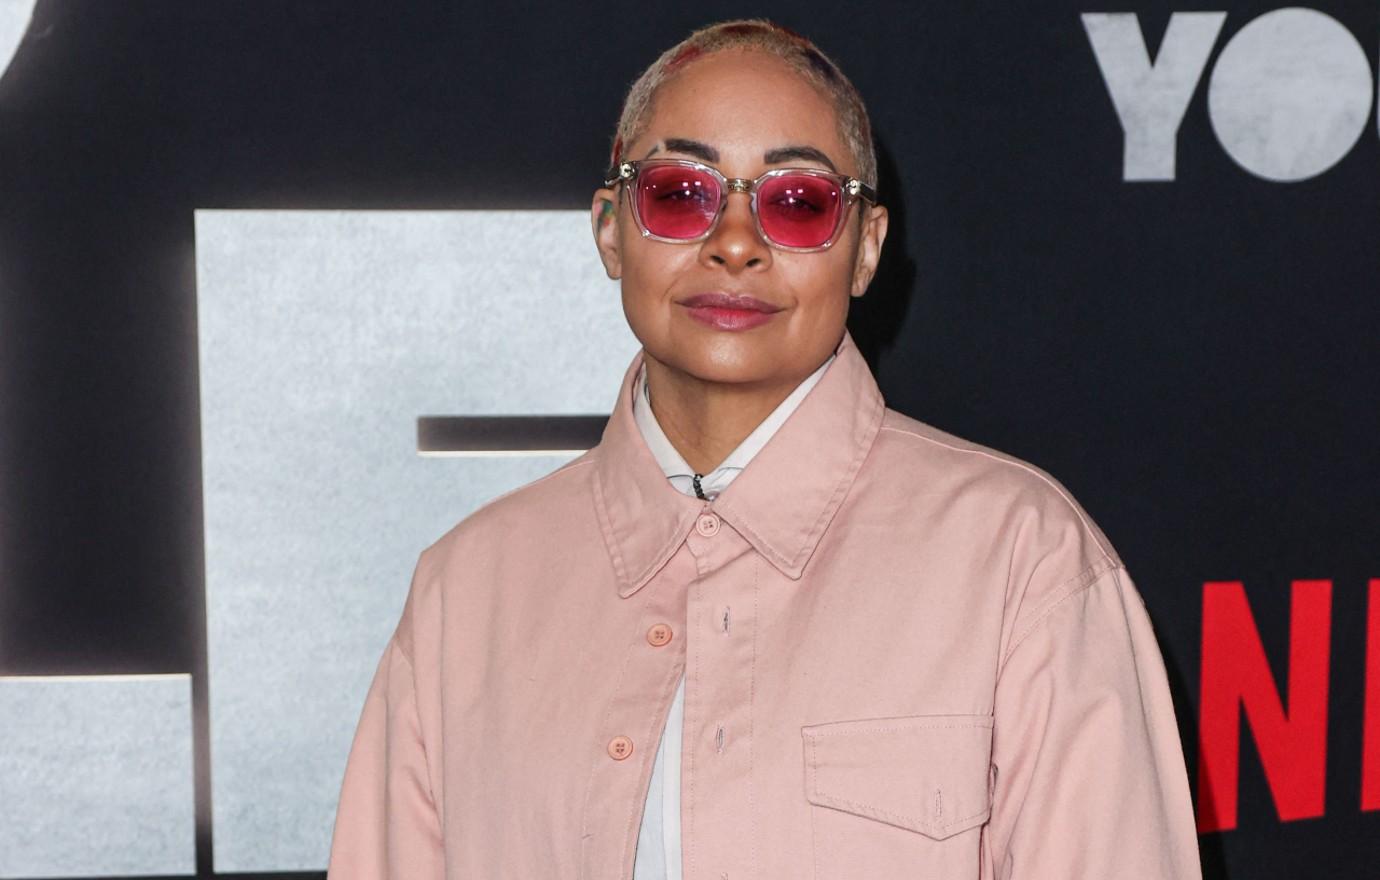 Raven-Symone Says Her Father Proposed Plastic Surgery Before Turning 18